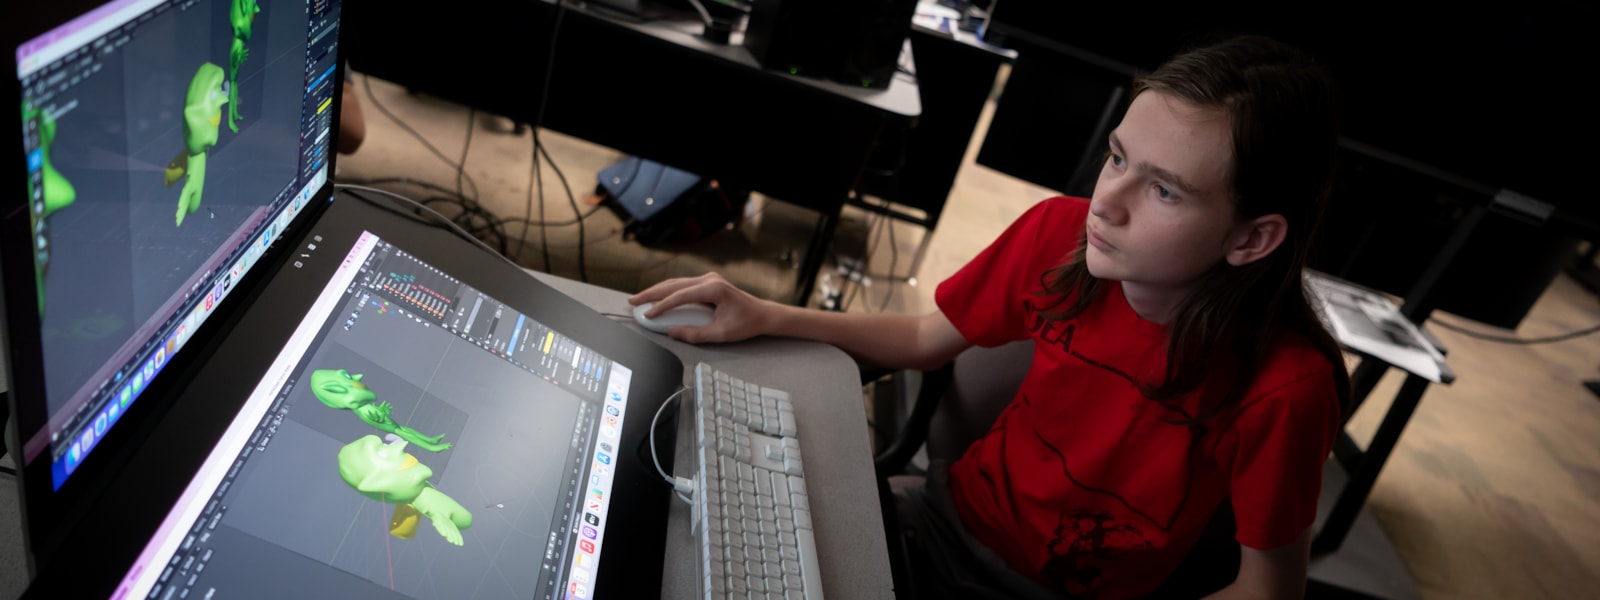 A student works on an animated character on a computer